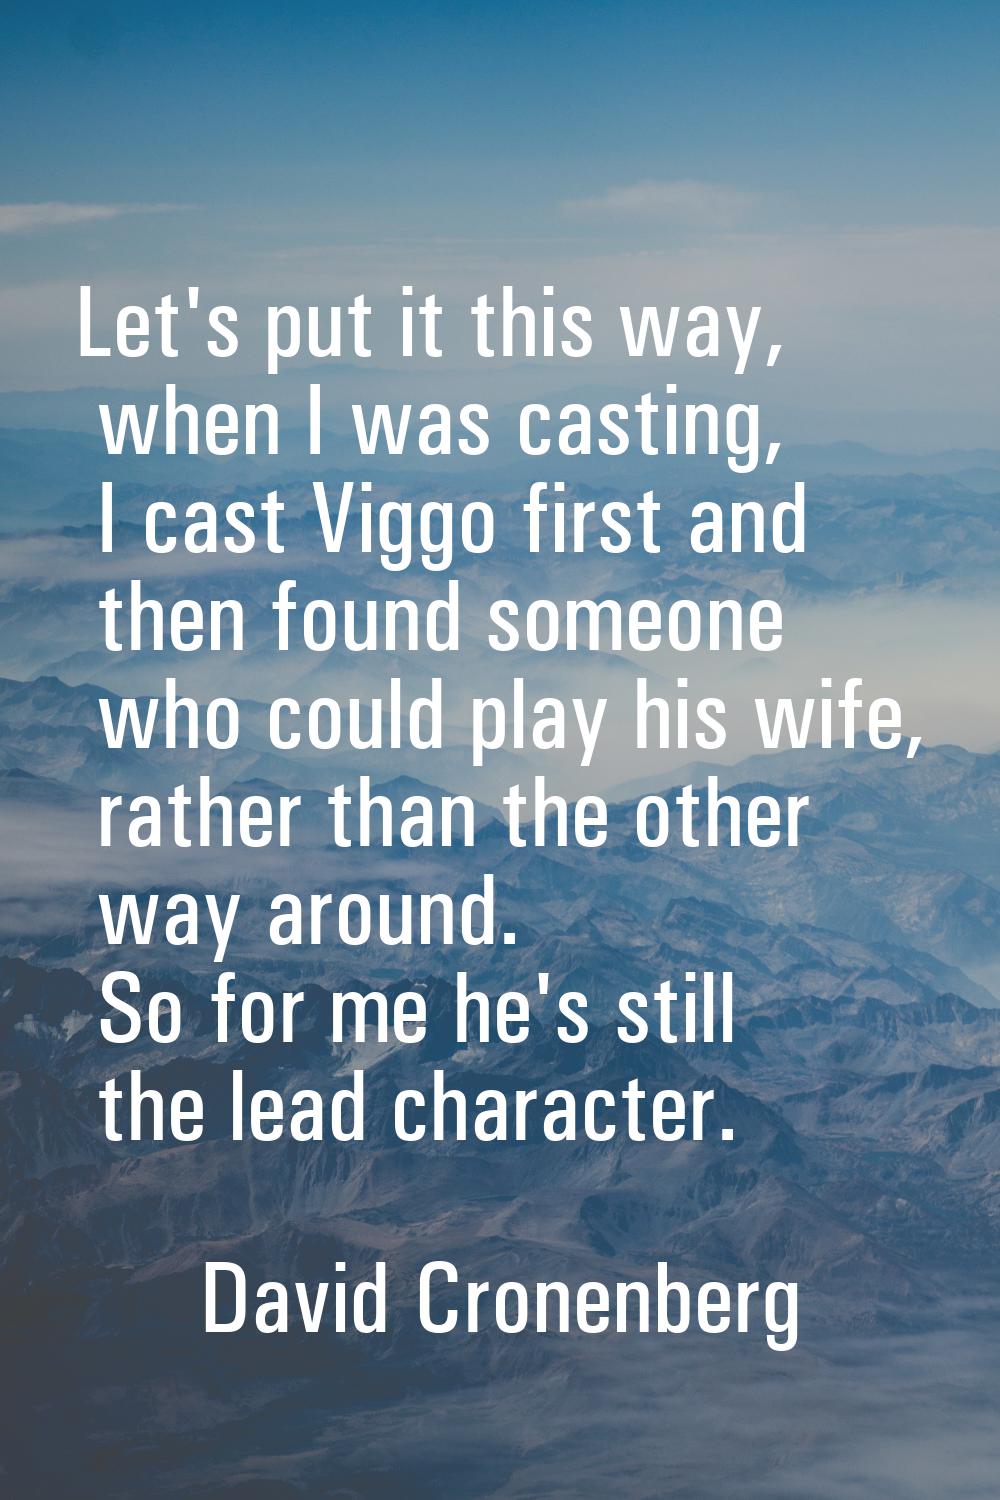 Let's put it this way, when I was casting, I cast Viggo first and then found someone who could play